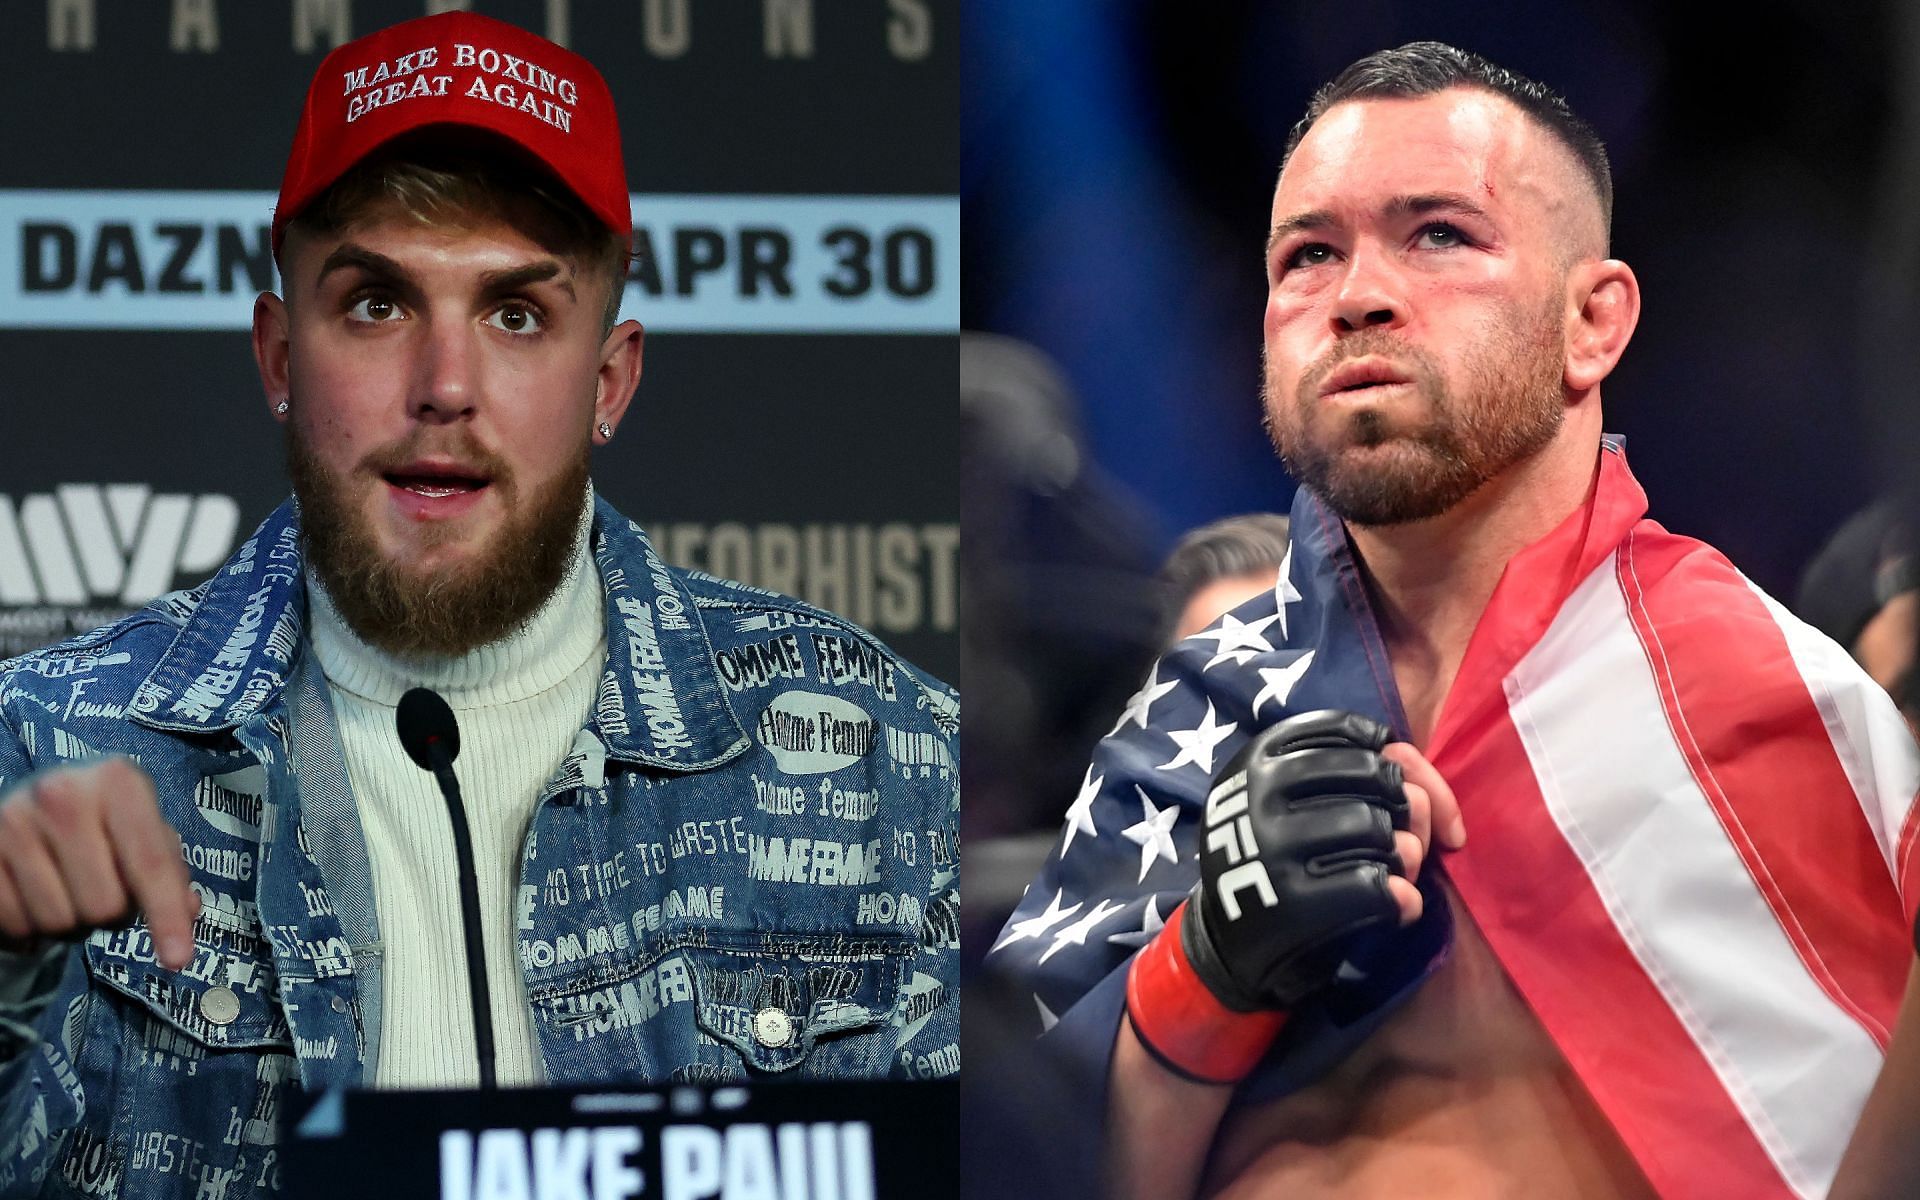 Jake Paul (left) and Colby Covington (right) (Images via Getty)